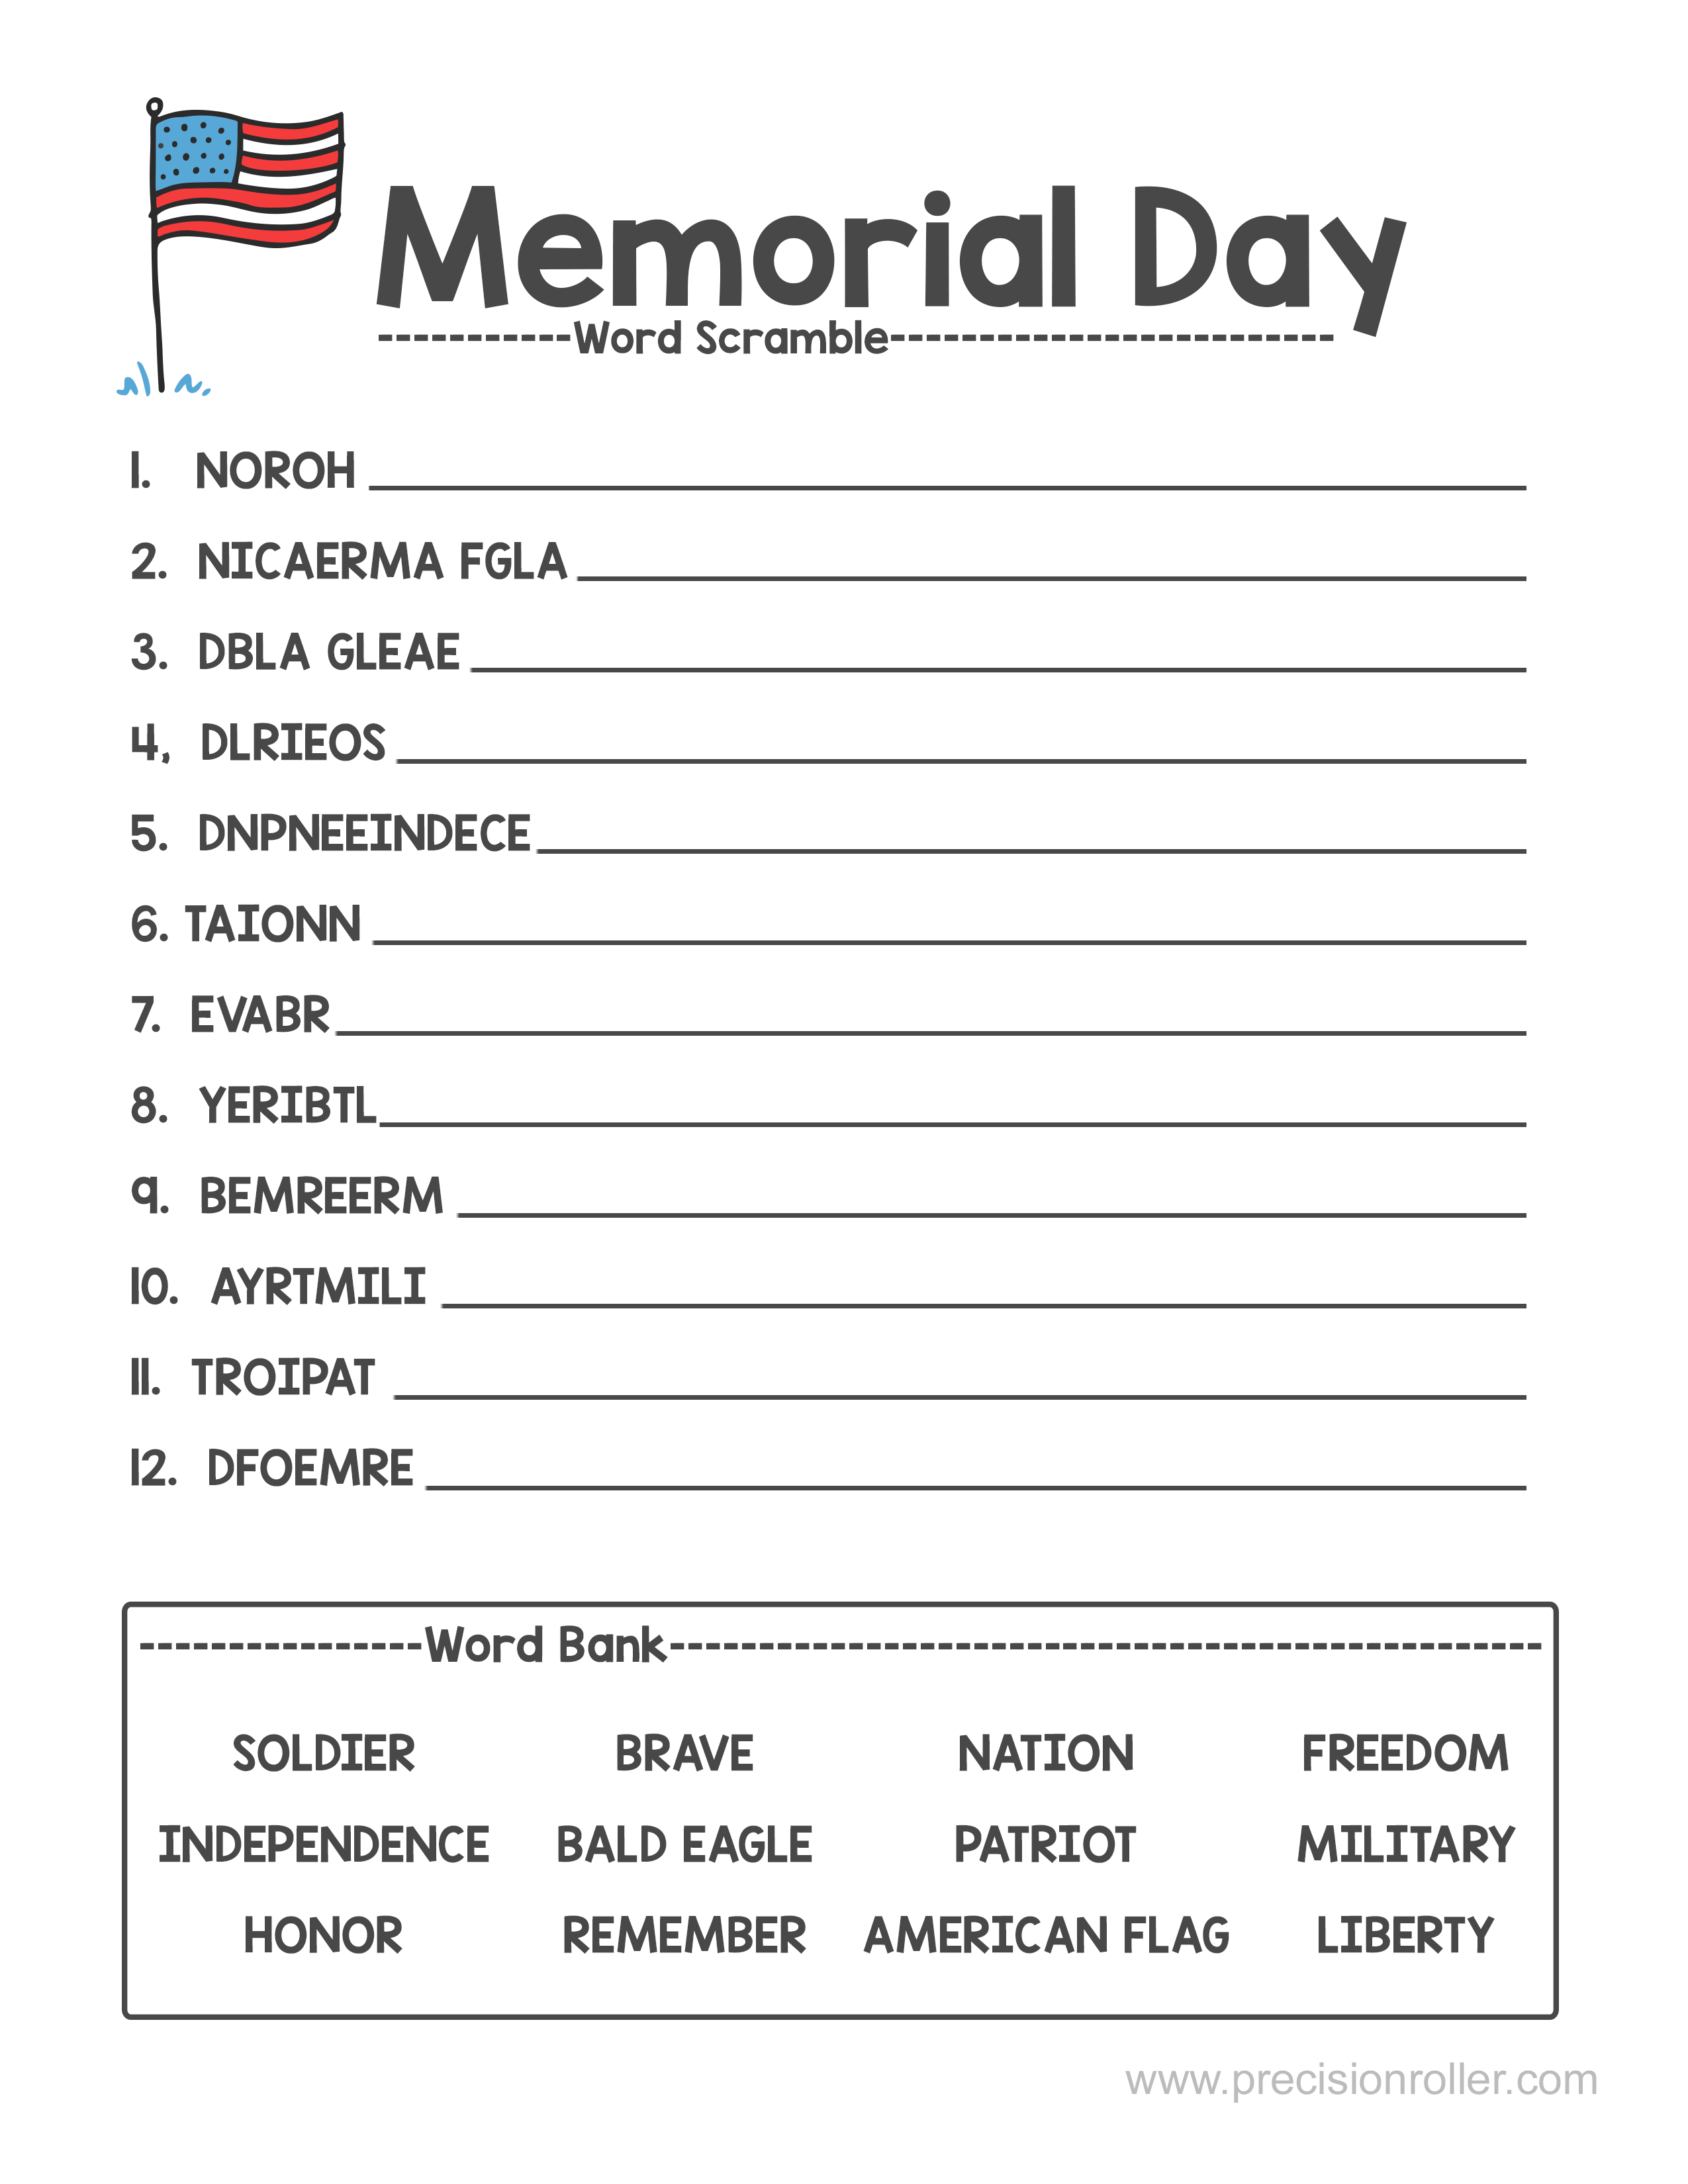 memorial-day-word-search-free-printable-printable-word-searches